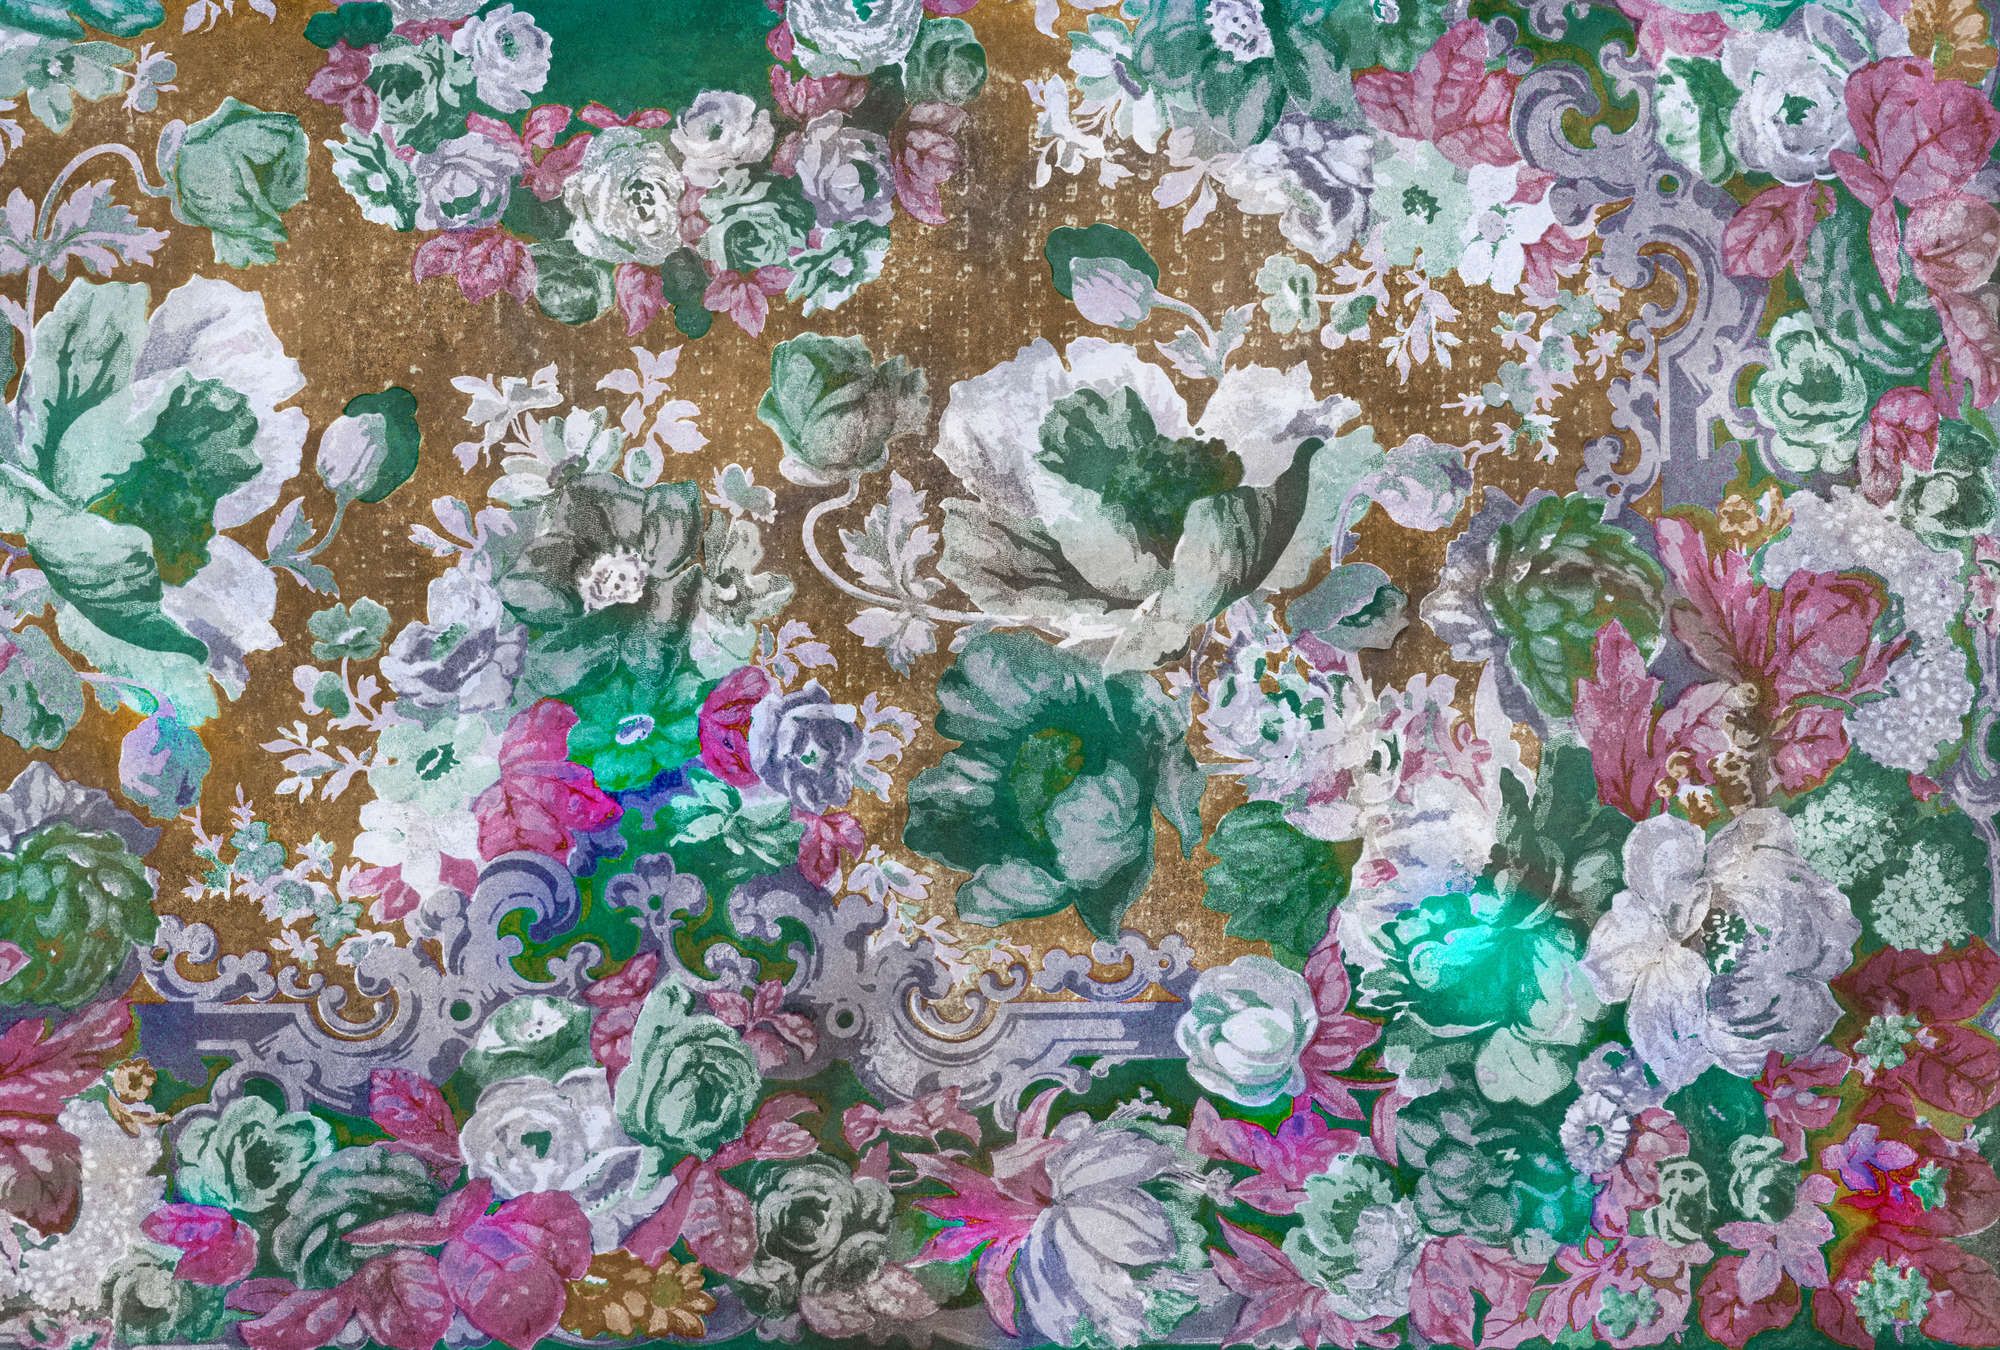             Photo wallpaper »carmente 1« - Classic style floral pattern in front of vintage plaster texture - Colourful | Light textured non-woven
        